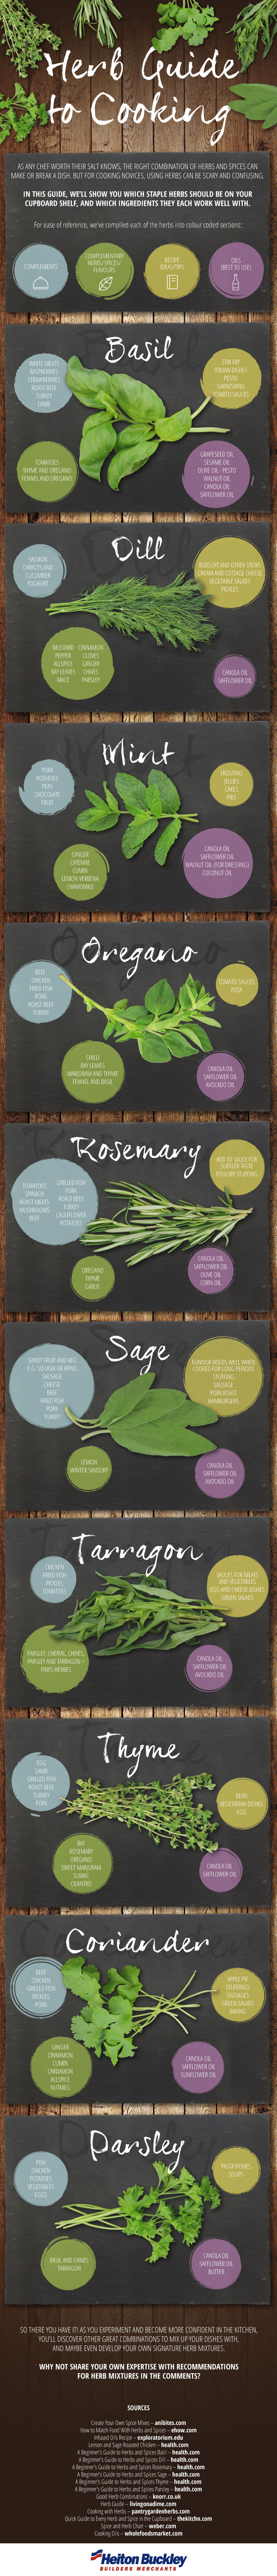 Herb Guide To Cooking